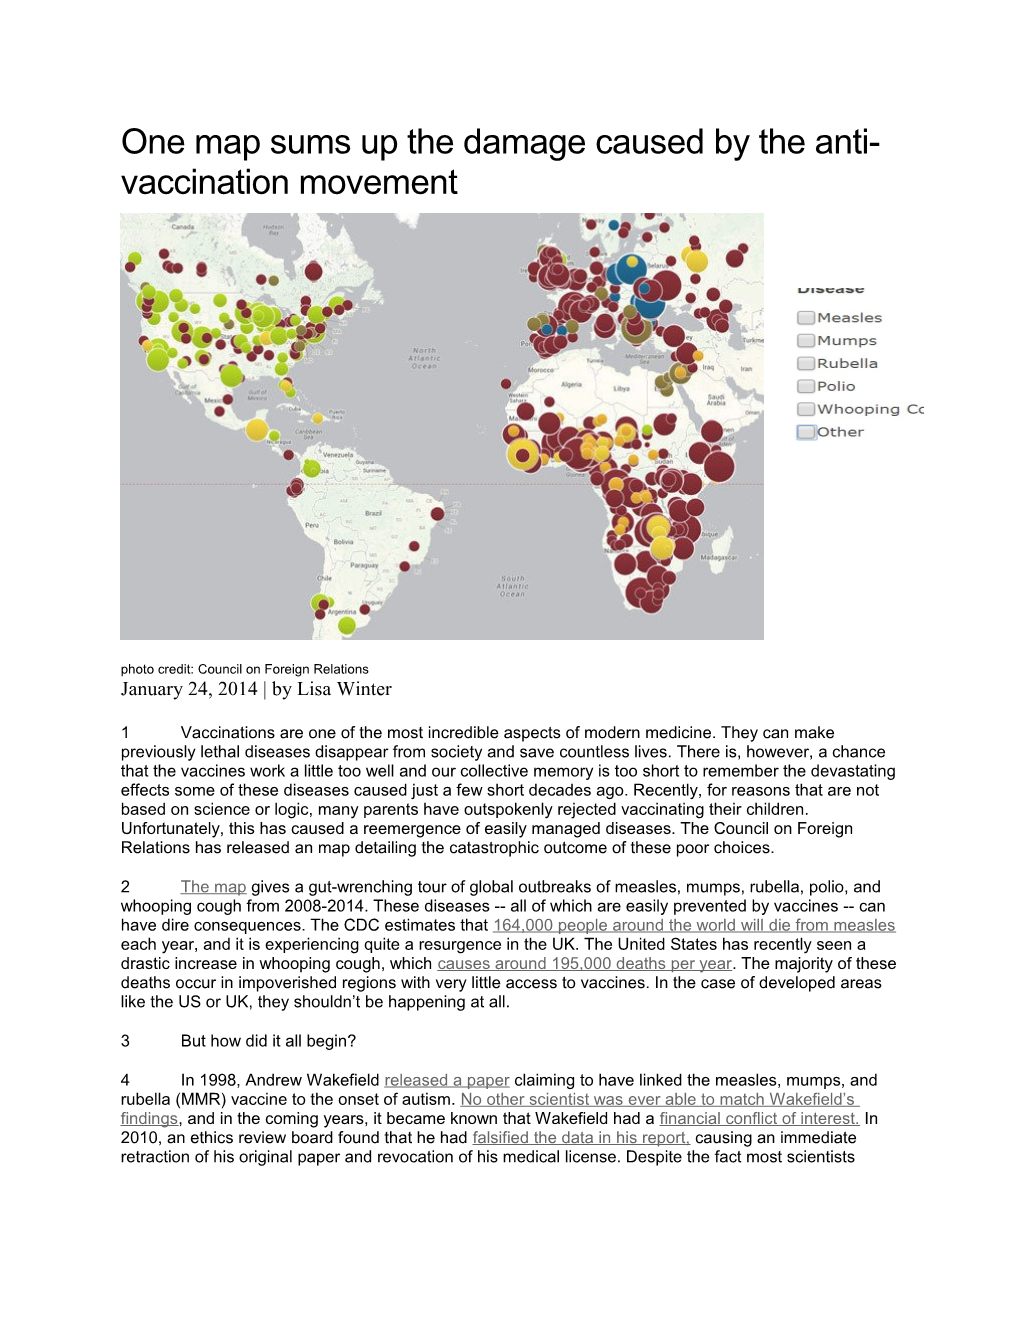 One Map Sums up the Damage Caused by the Anti-Vaccination Movement